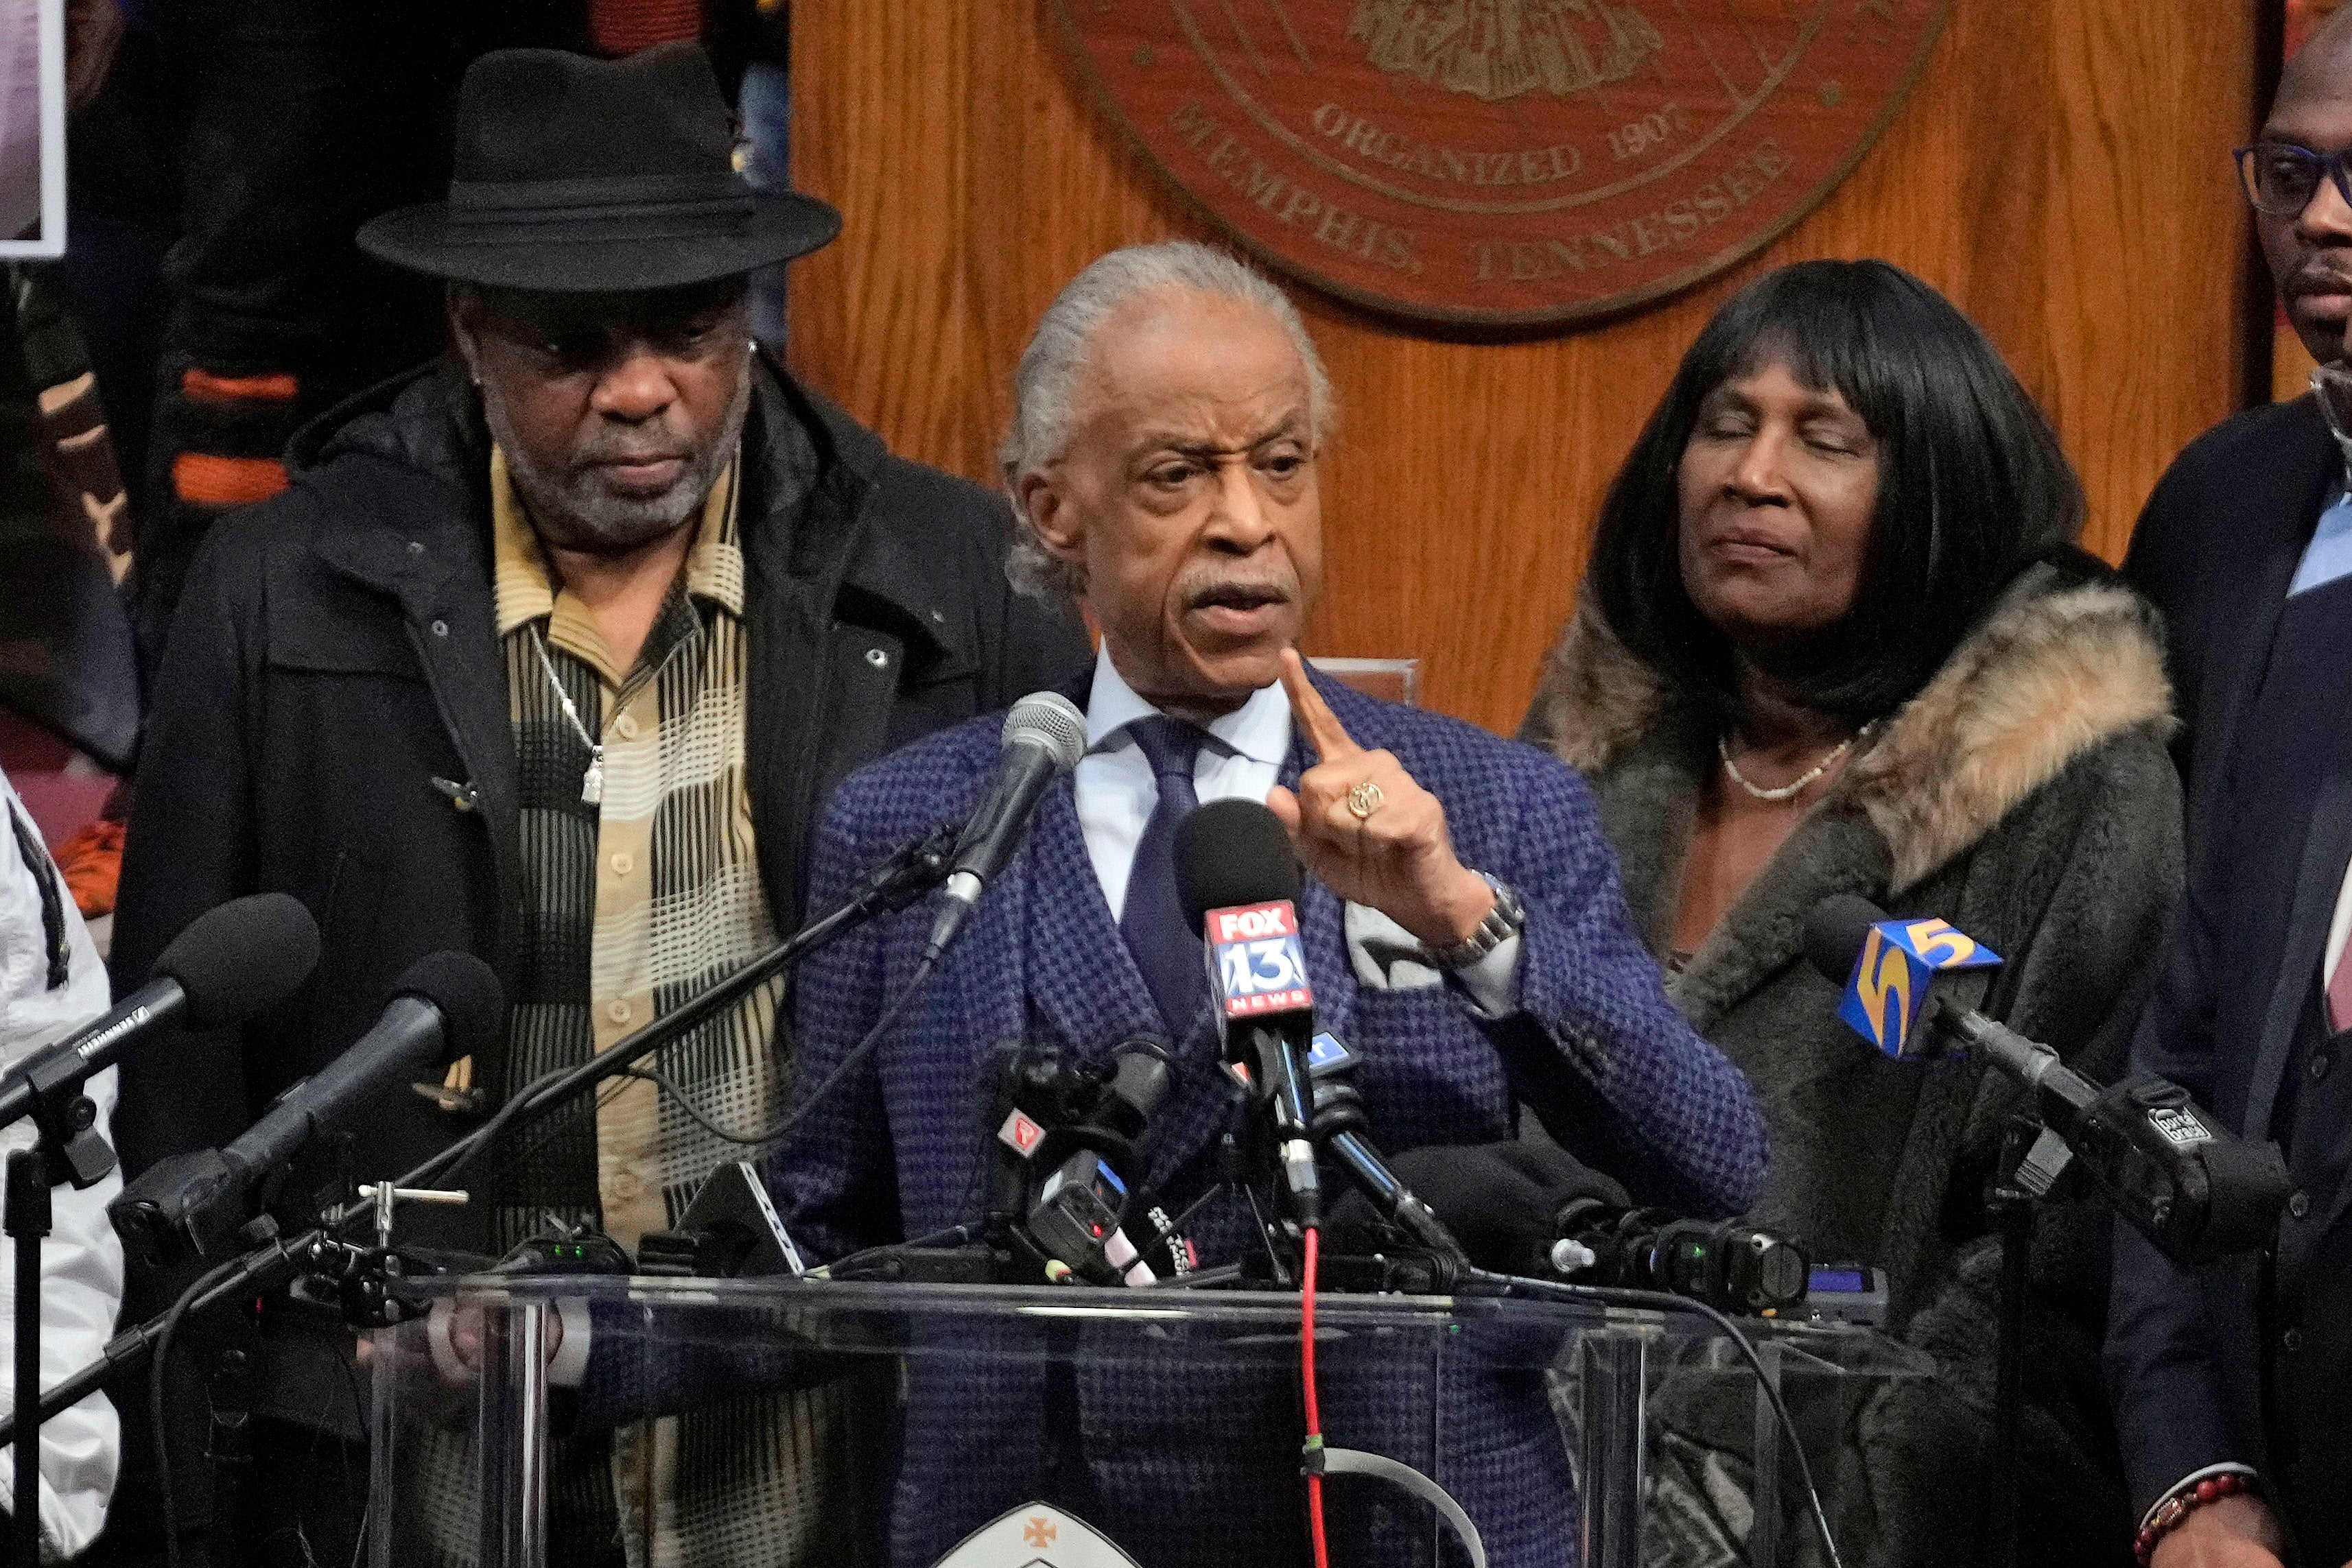 The Rev Al Sharpton speaks at the historic Mason Temple as he is flanked by RowVaughn Wells, right, mother of Tyre Nichols, and Tyre's stepfather Rodney Wells